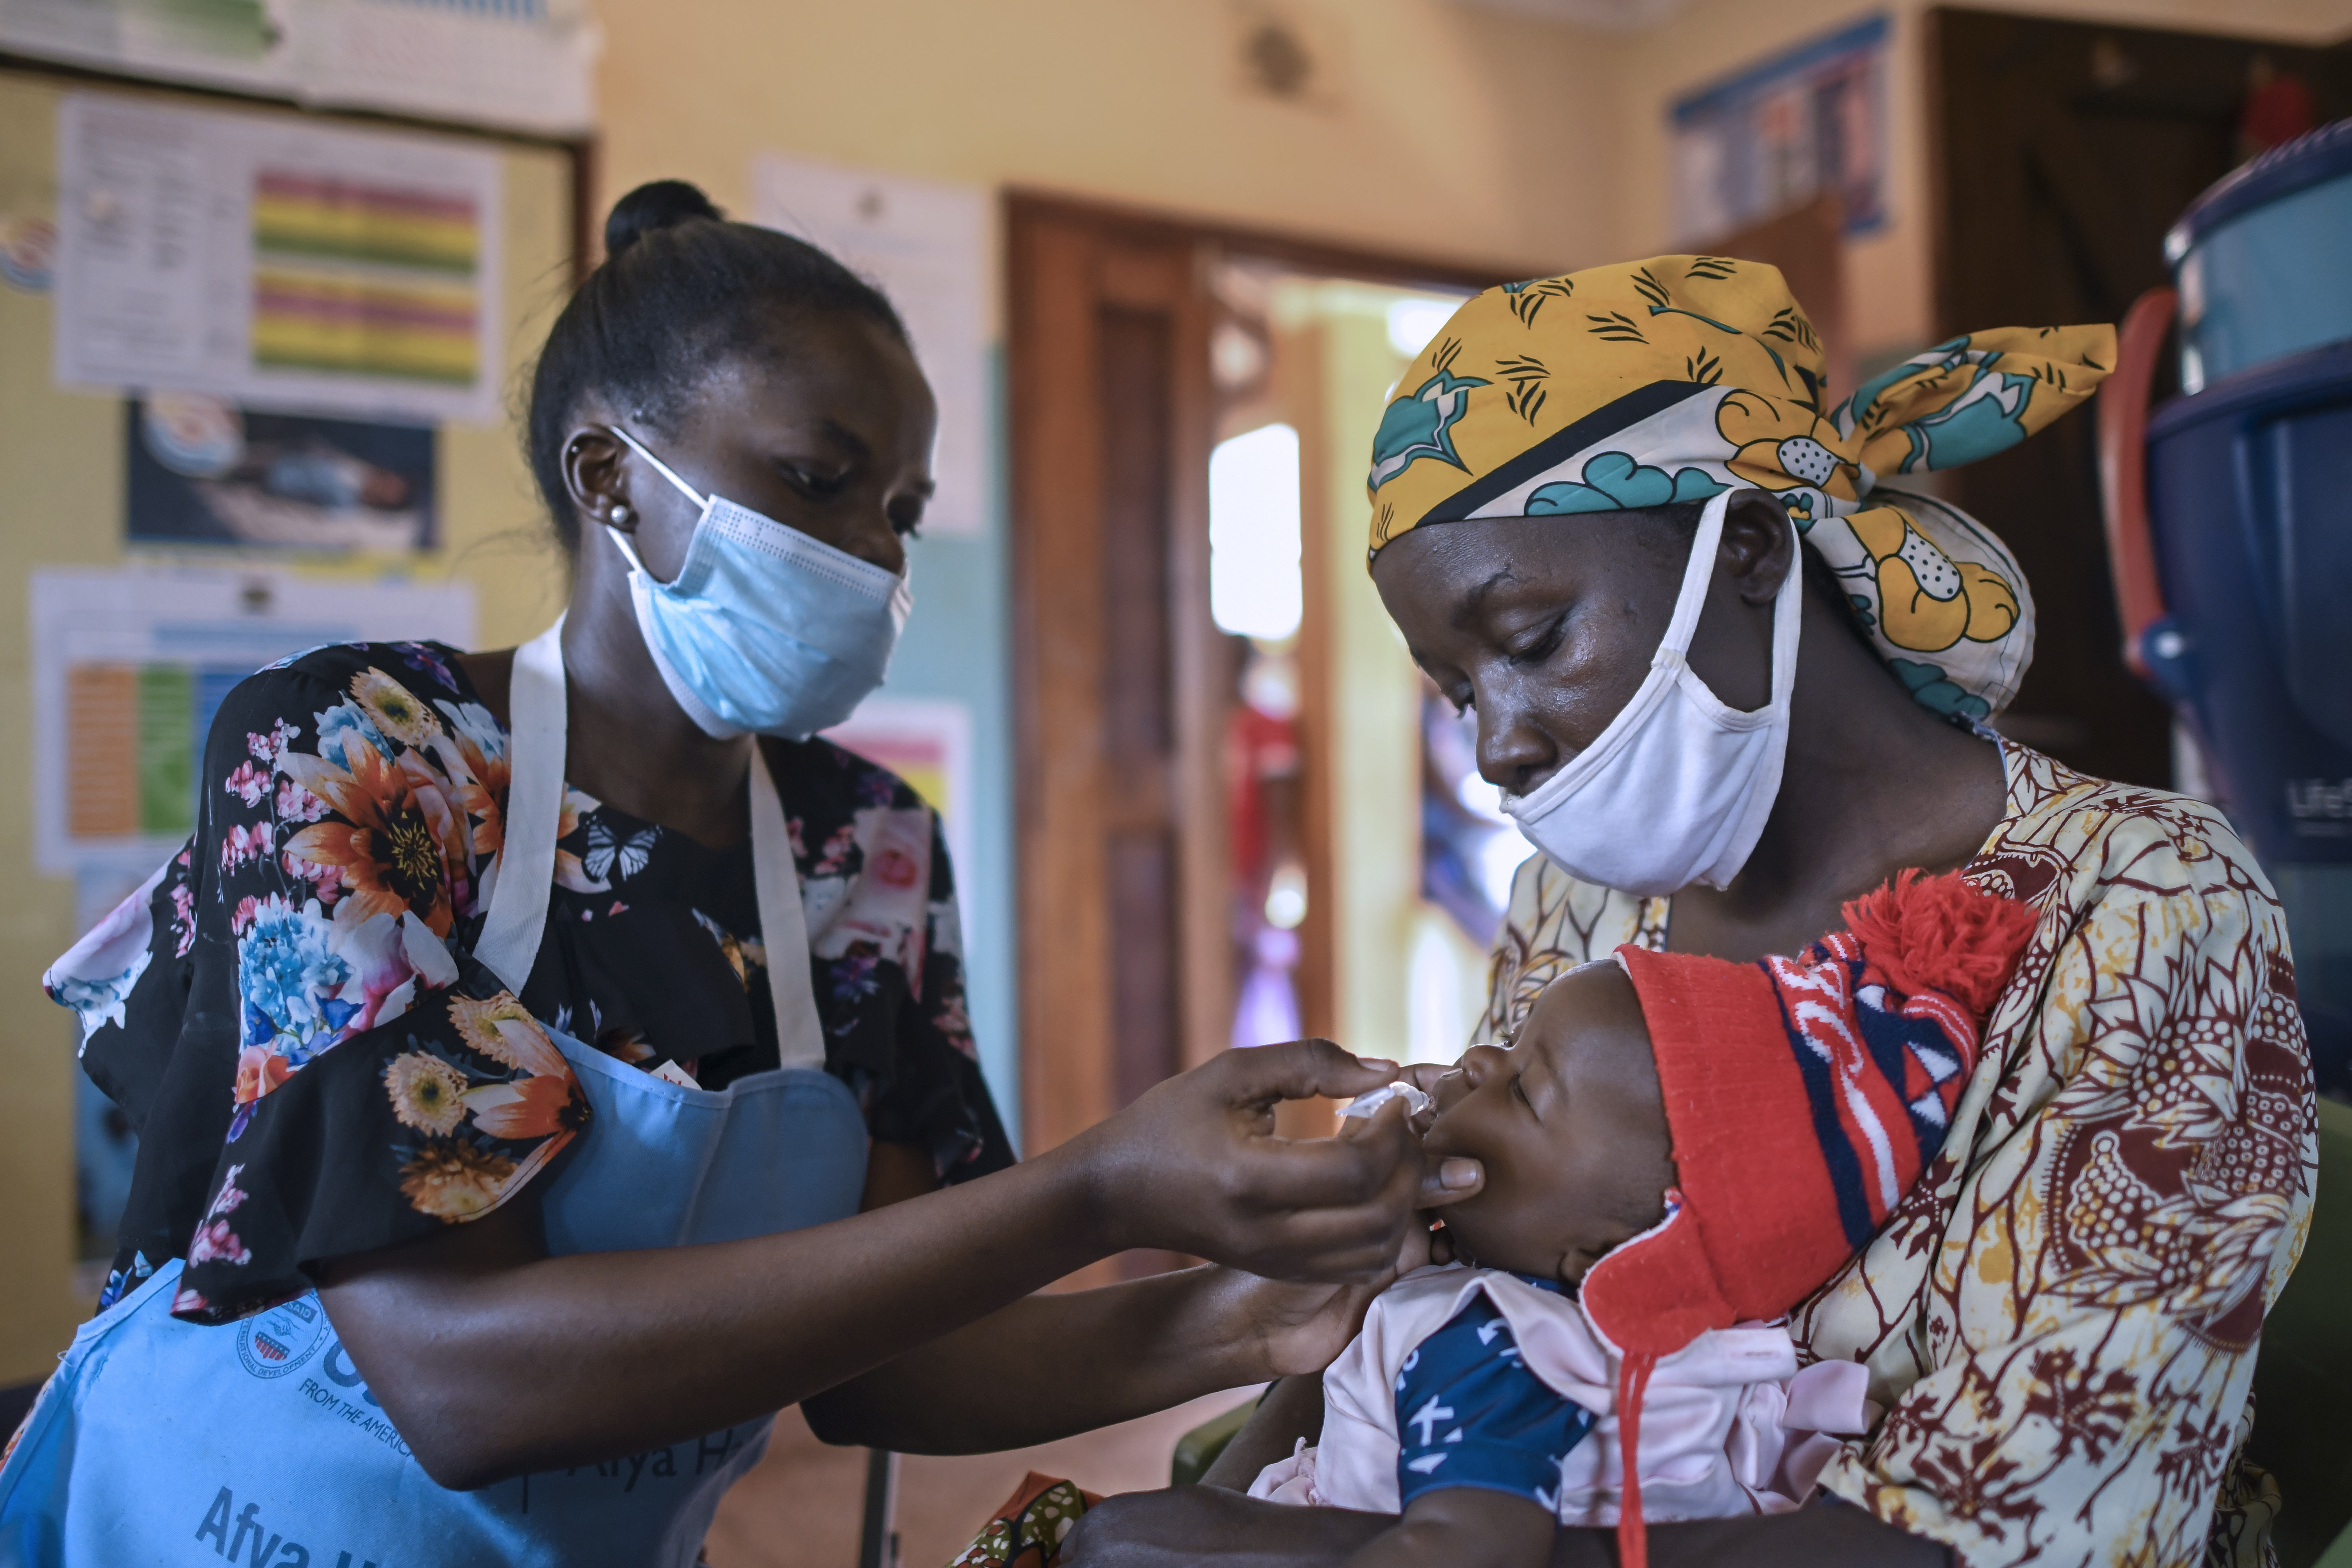 Annet Onyamasi (left) administers an oral rotavirus vaccine to an infant in Khwisero, Kenya. PATH/Anthony Karumba